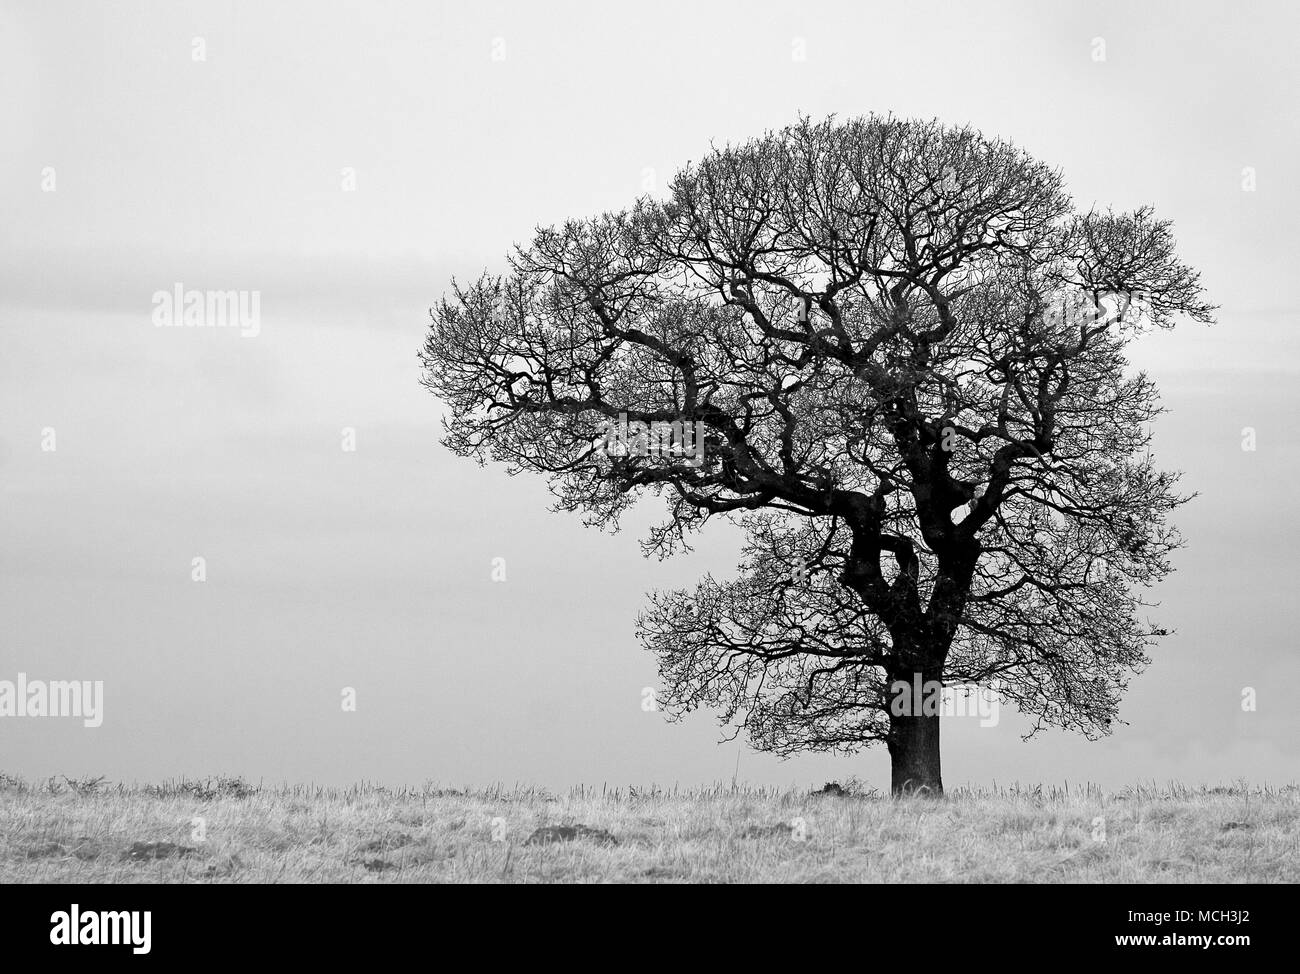 Solitary tree with no leaves Stock Photo